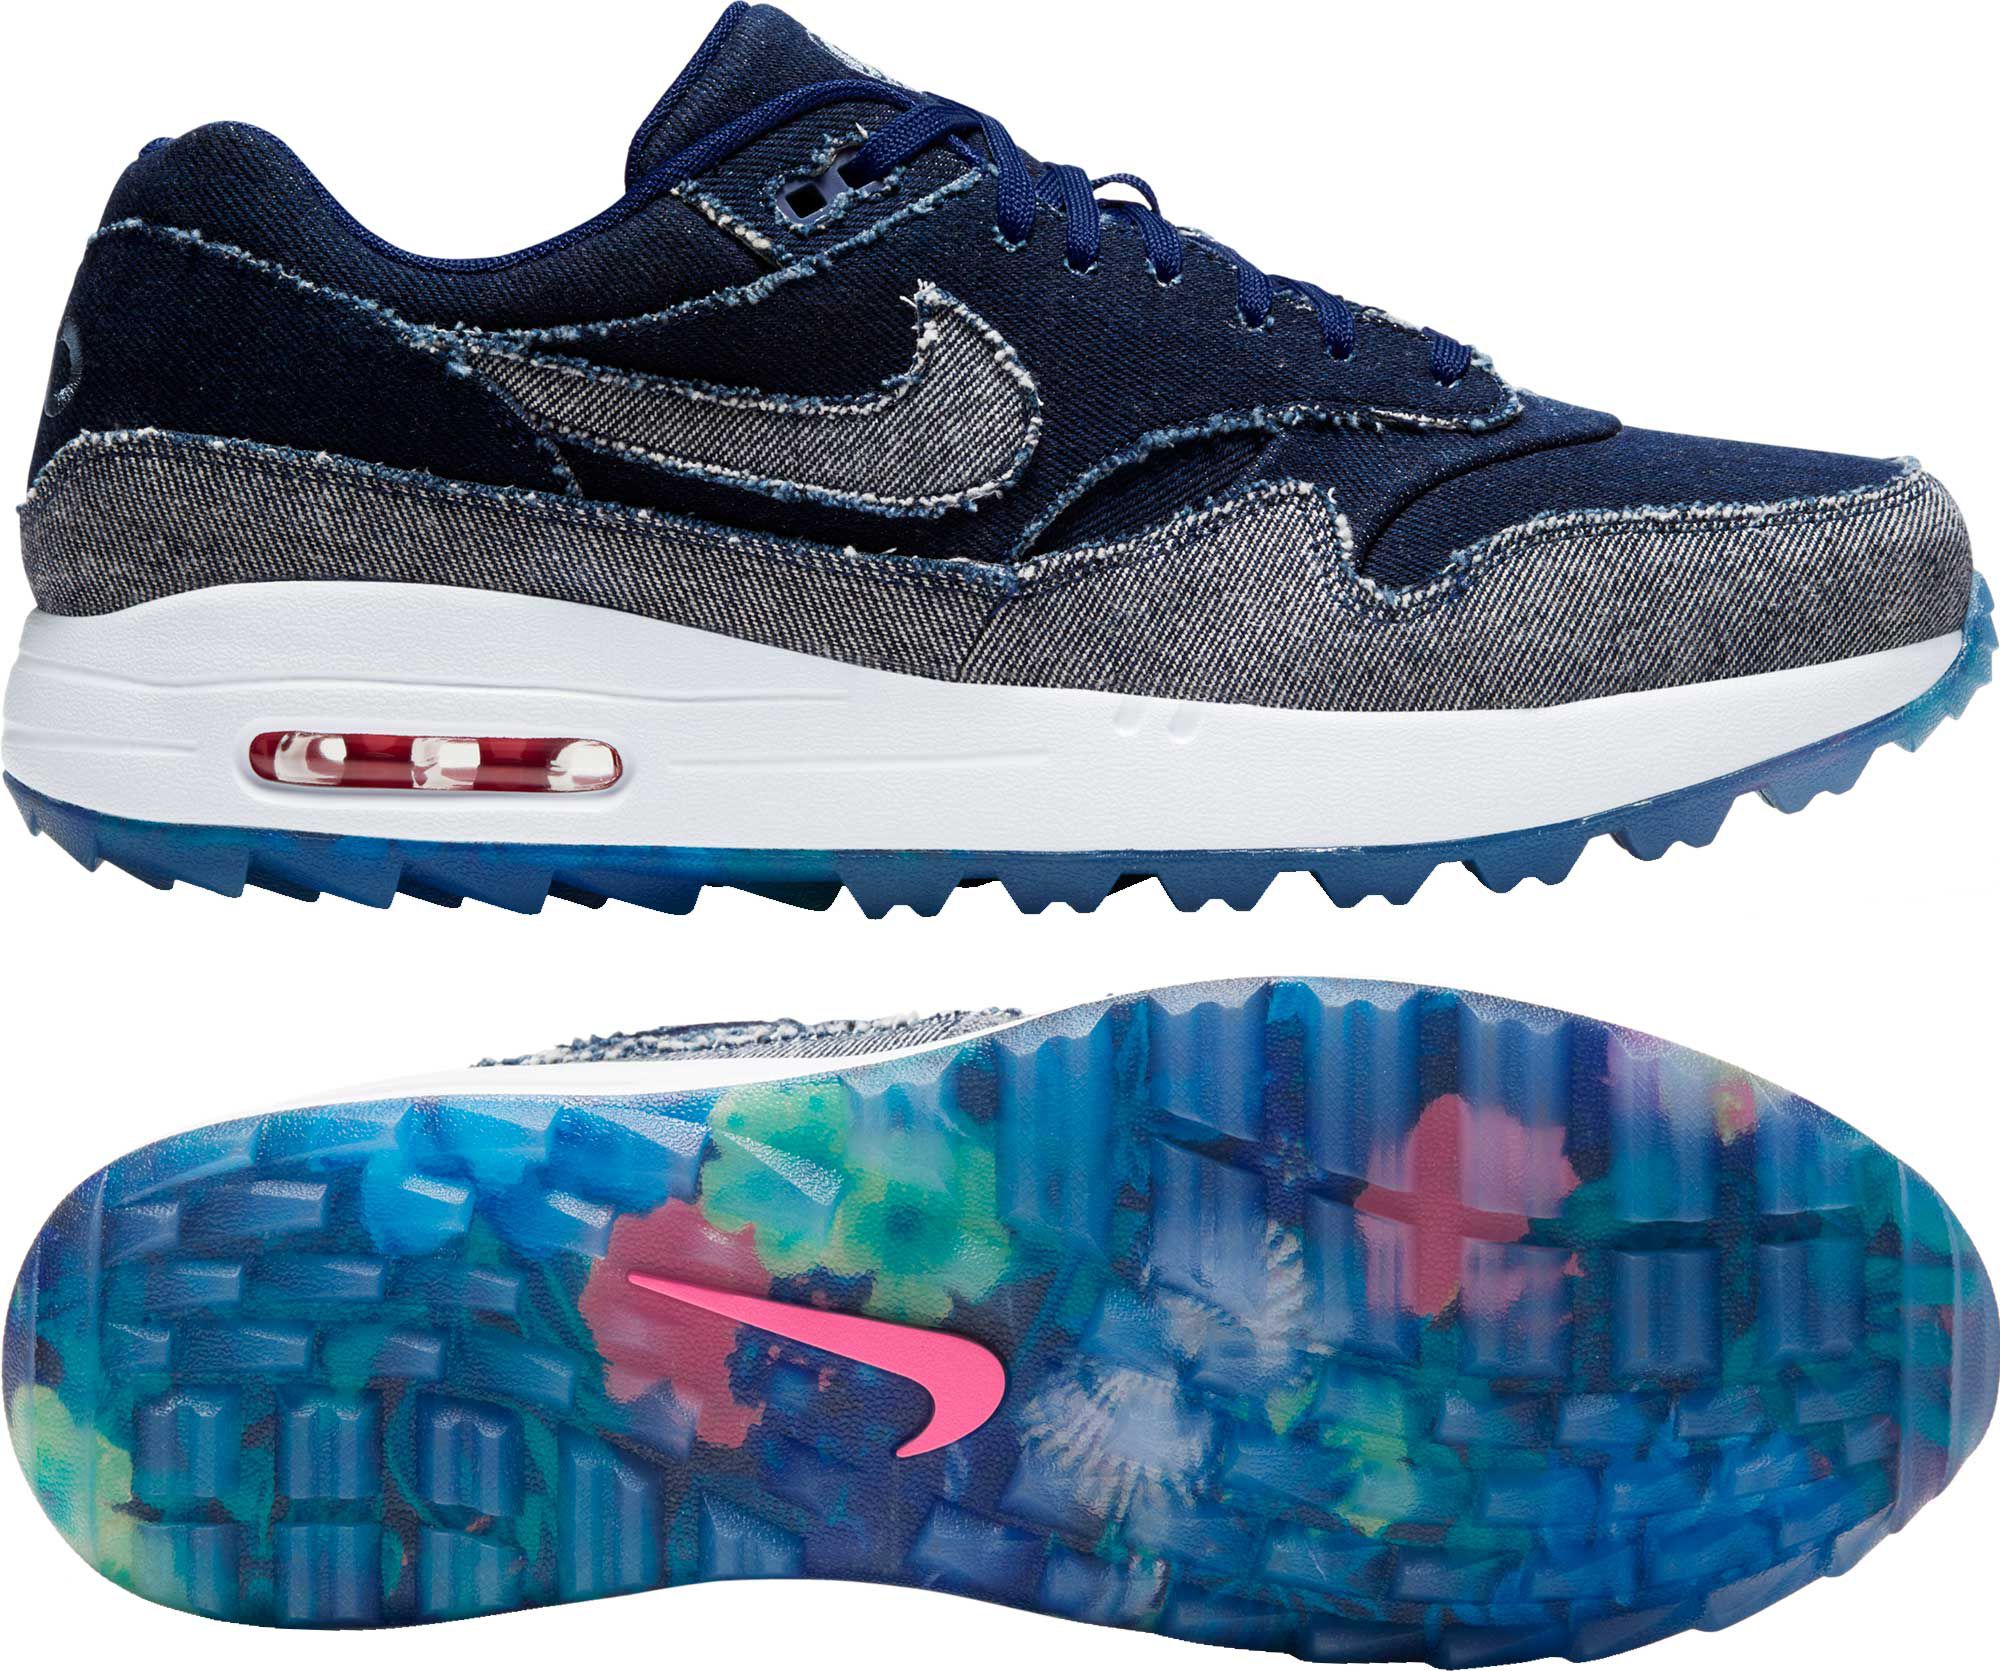 Nike Men's Limited Edition Air Max 1 G NRG Denim Golf Shoes | DICK'S  Sporting Goods